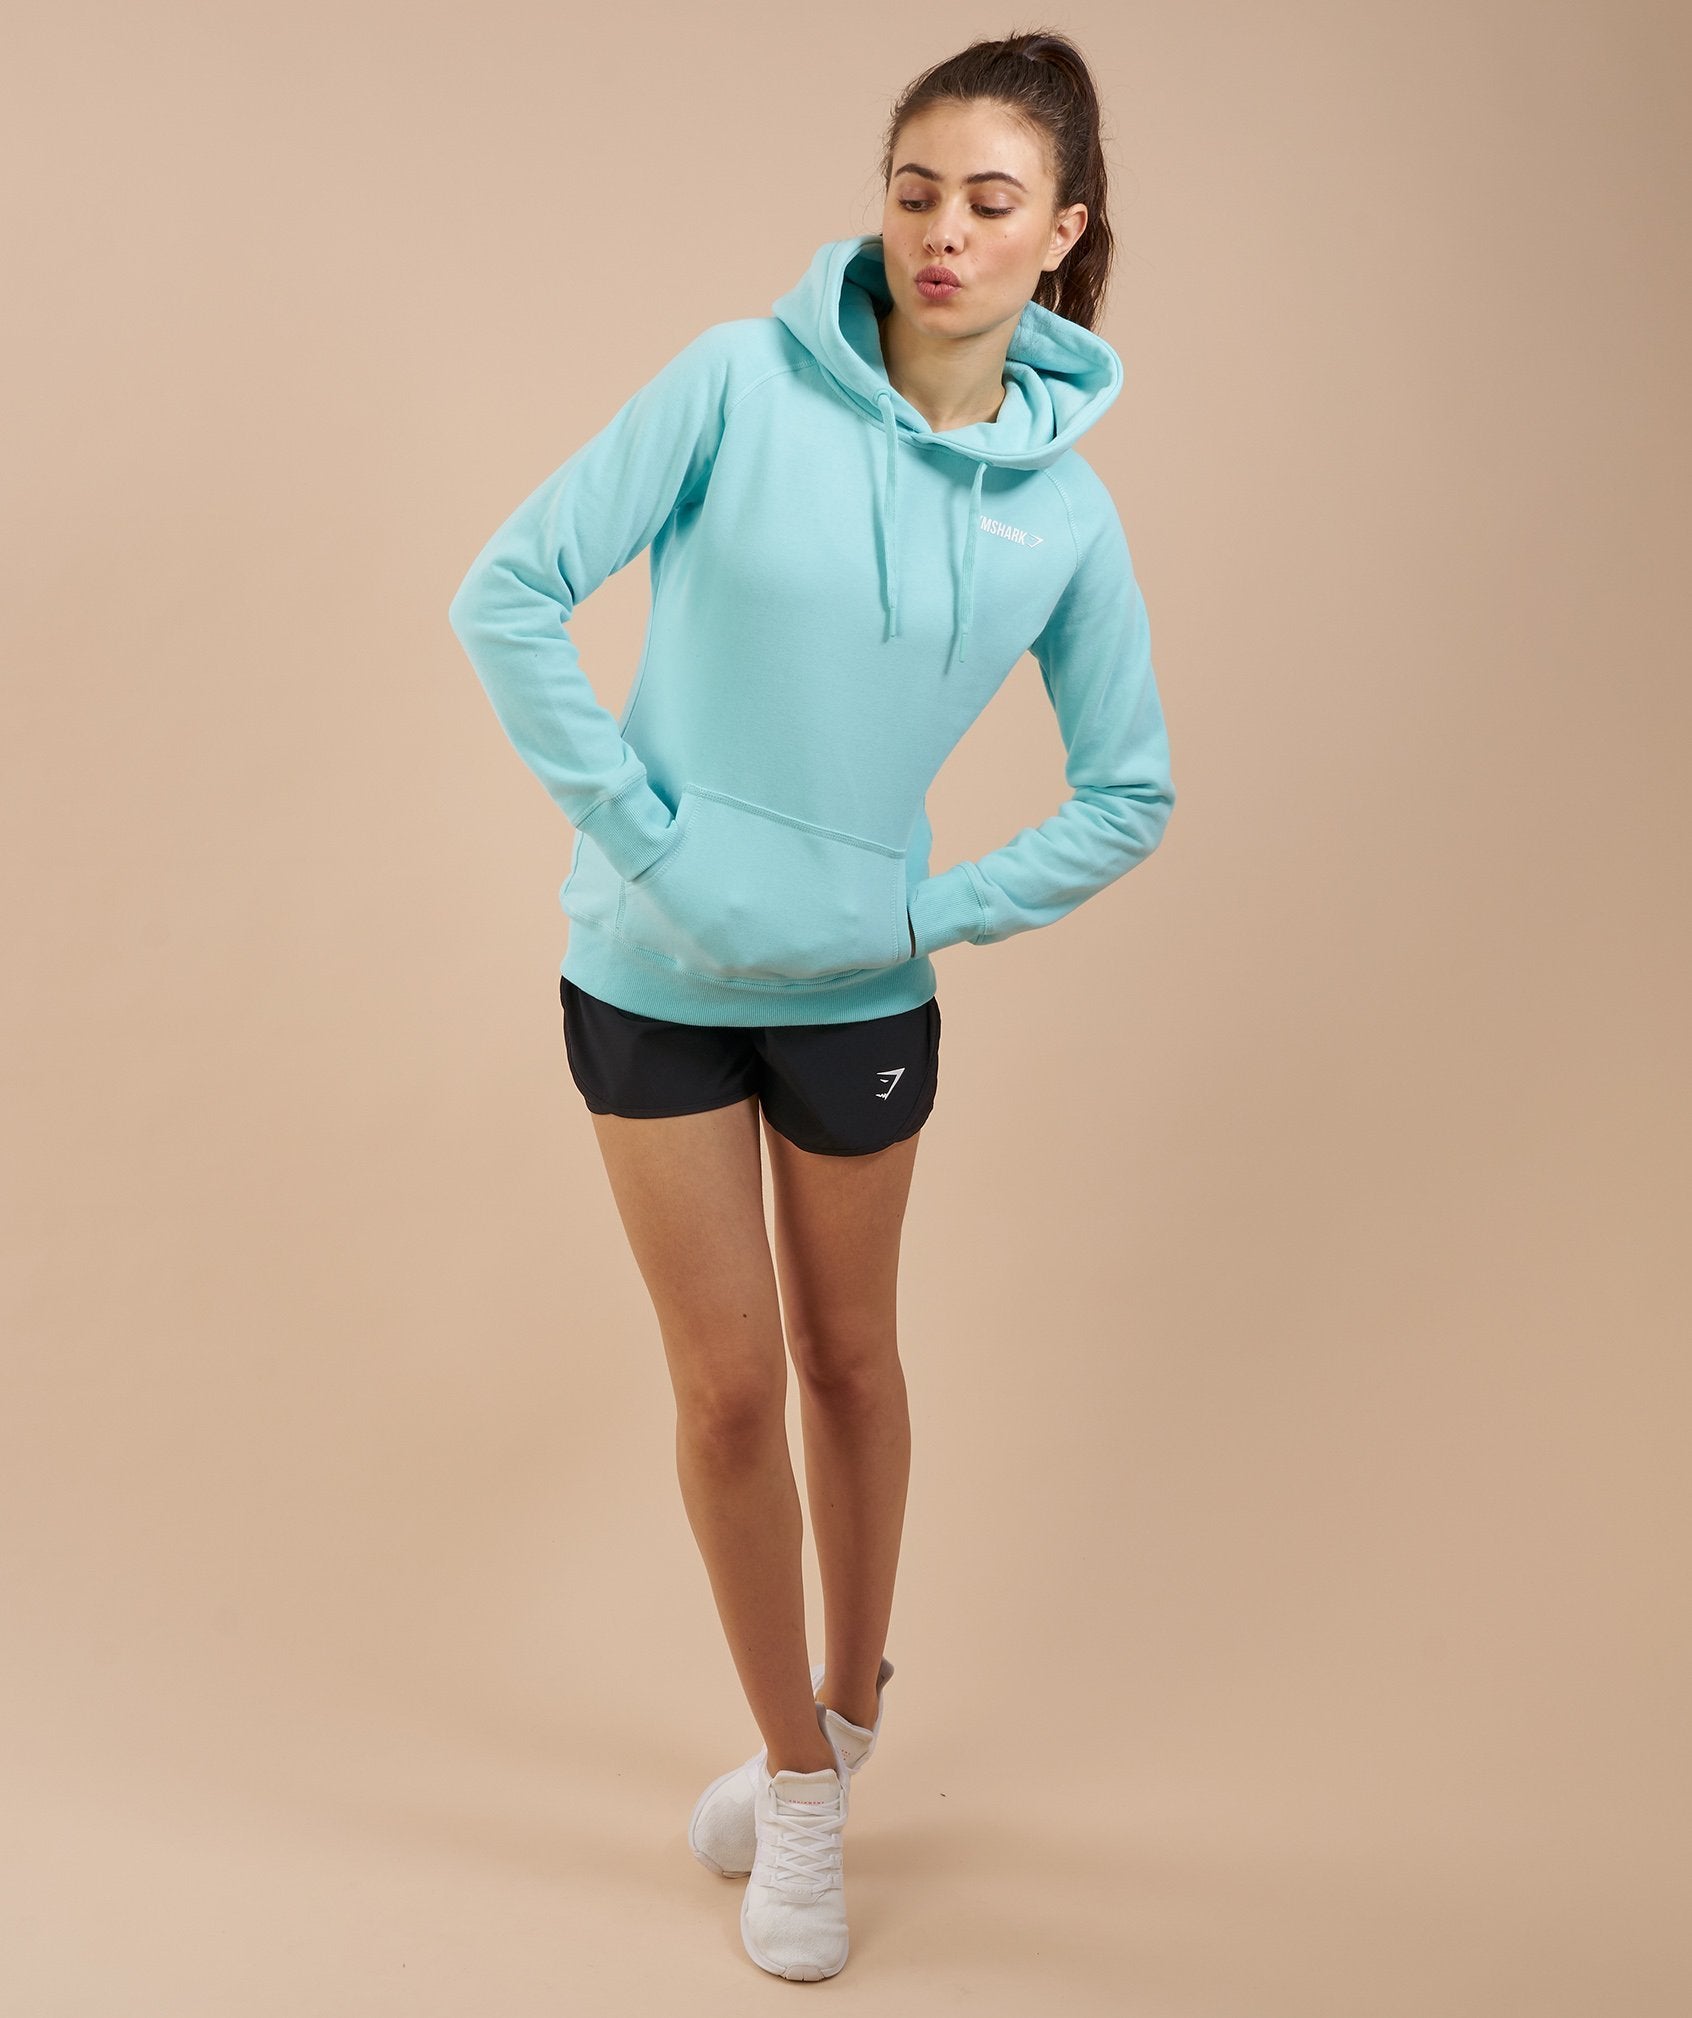 Women's Crest Hoodie in Pale Turquoise - view 5